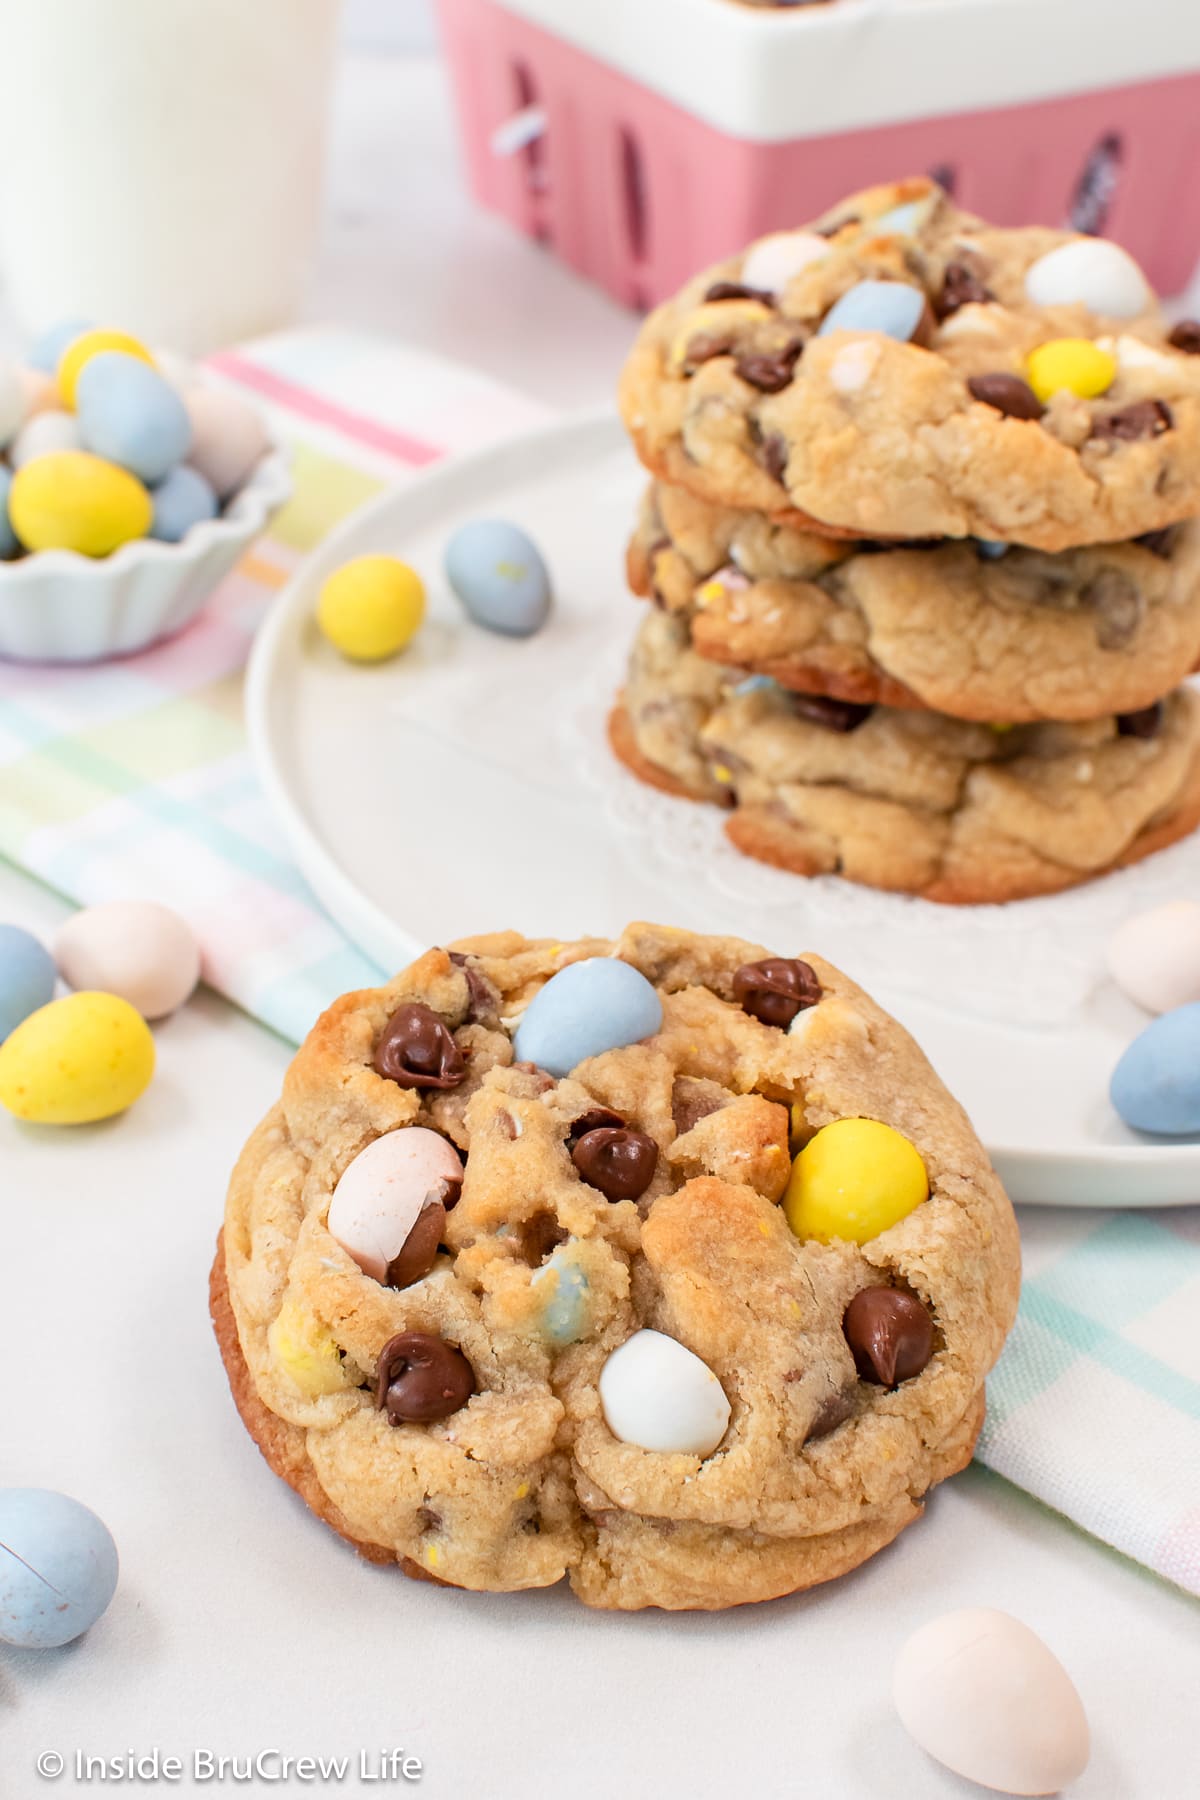 A thick cookie loaded with candy and chocolate chips.